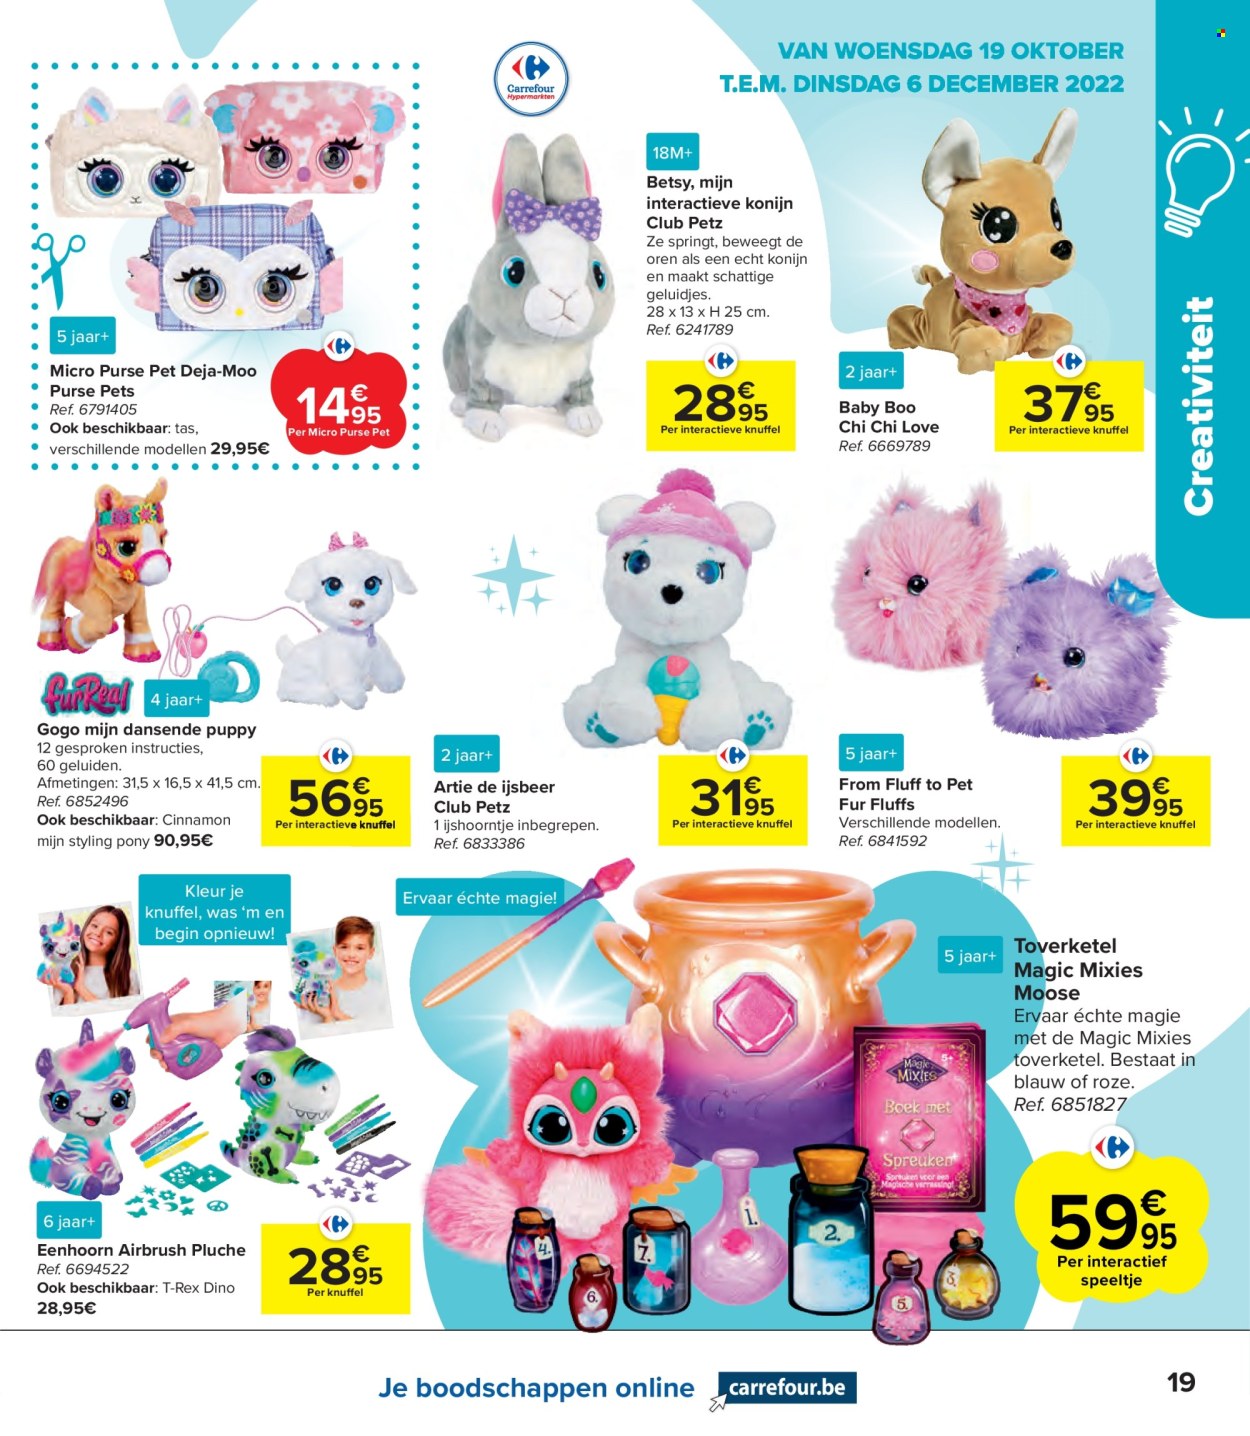 Catalogue Carrefour hypermarkt - 19.10.2022 - 6.12.2022. Page 19.